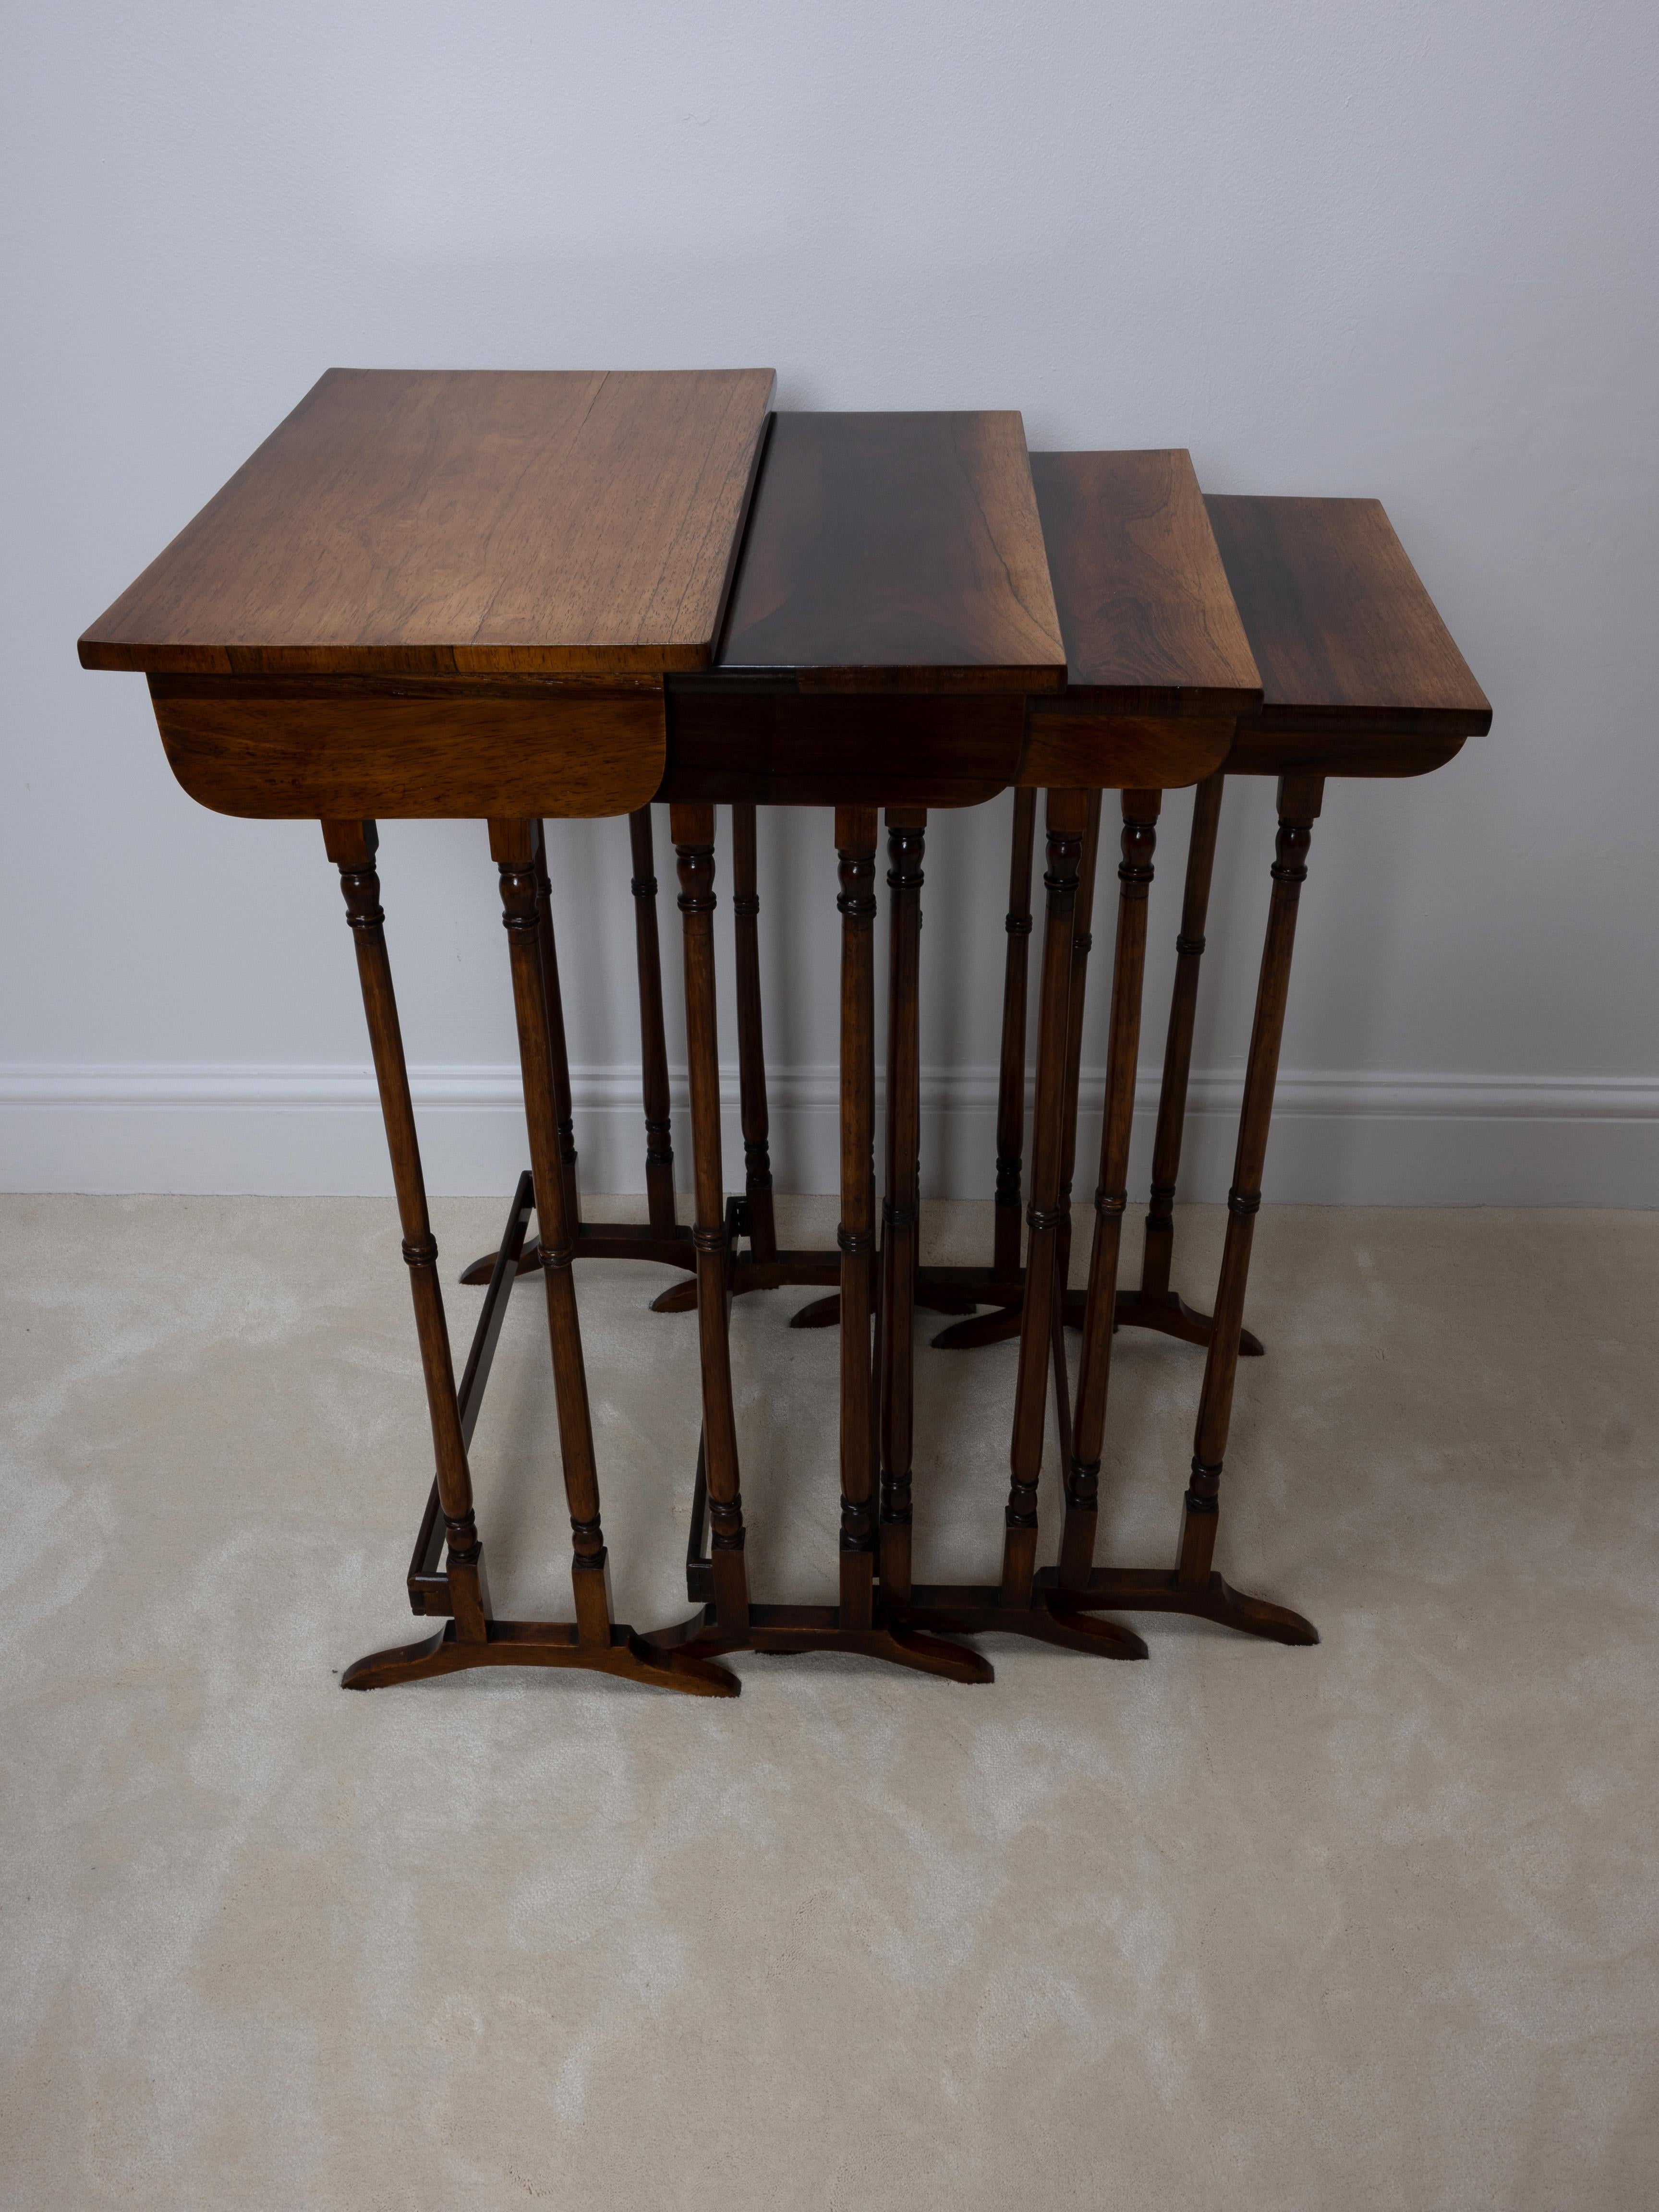 19th Century Antique English Regency Revival Rosewood Quartetto Of Nesting Table C.1820 For Sale